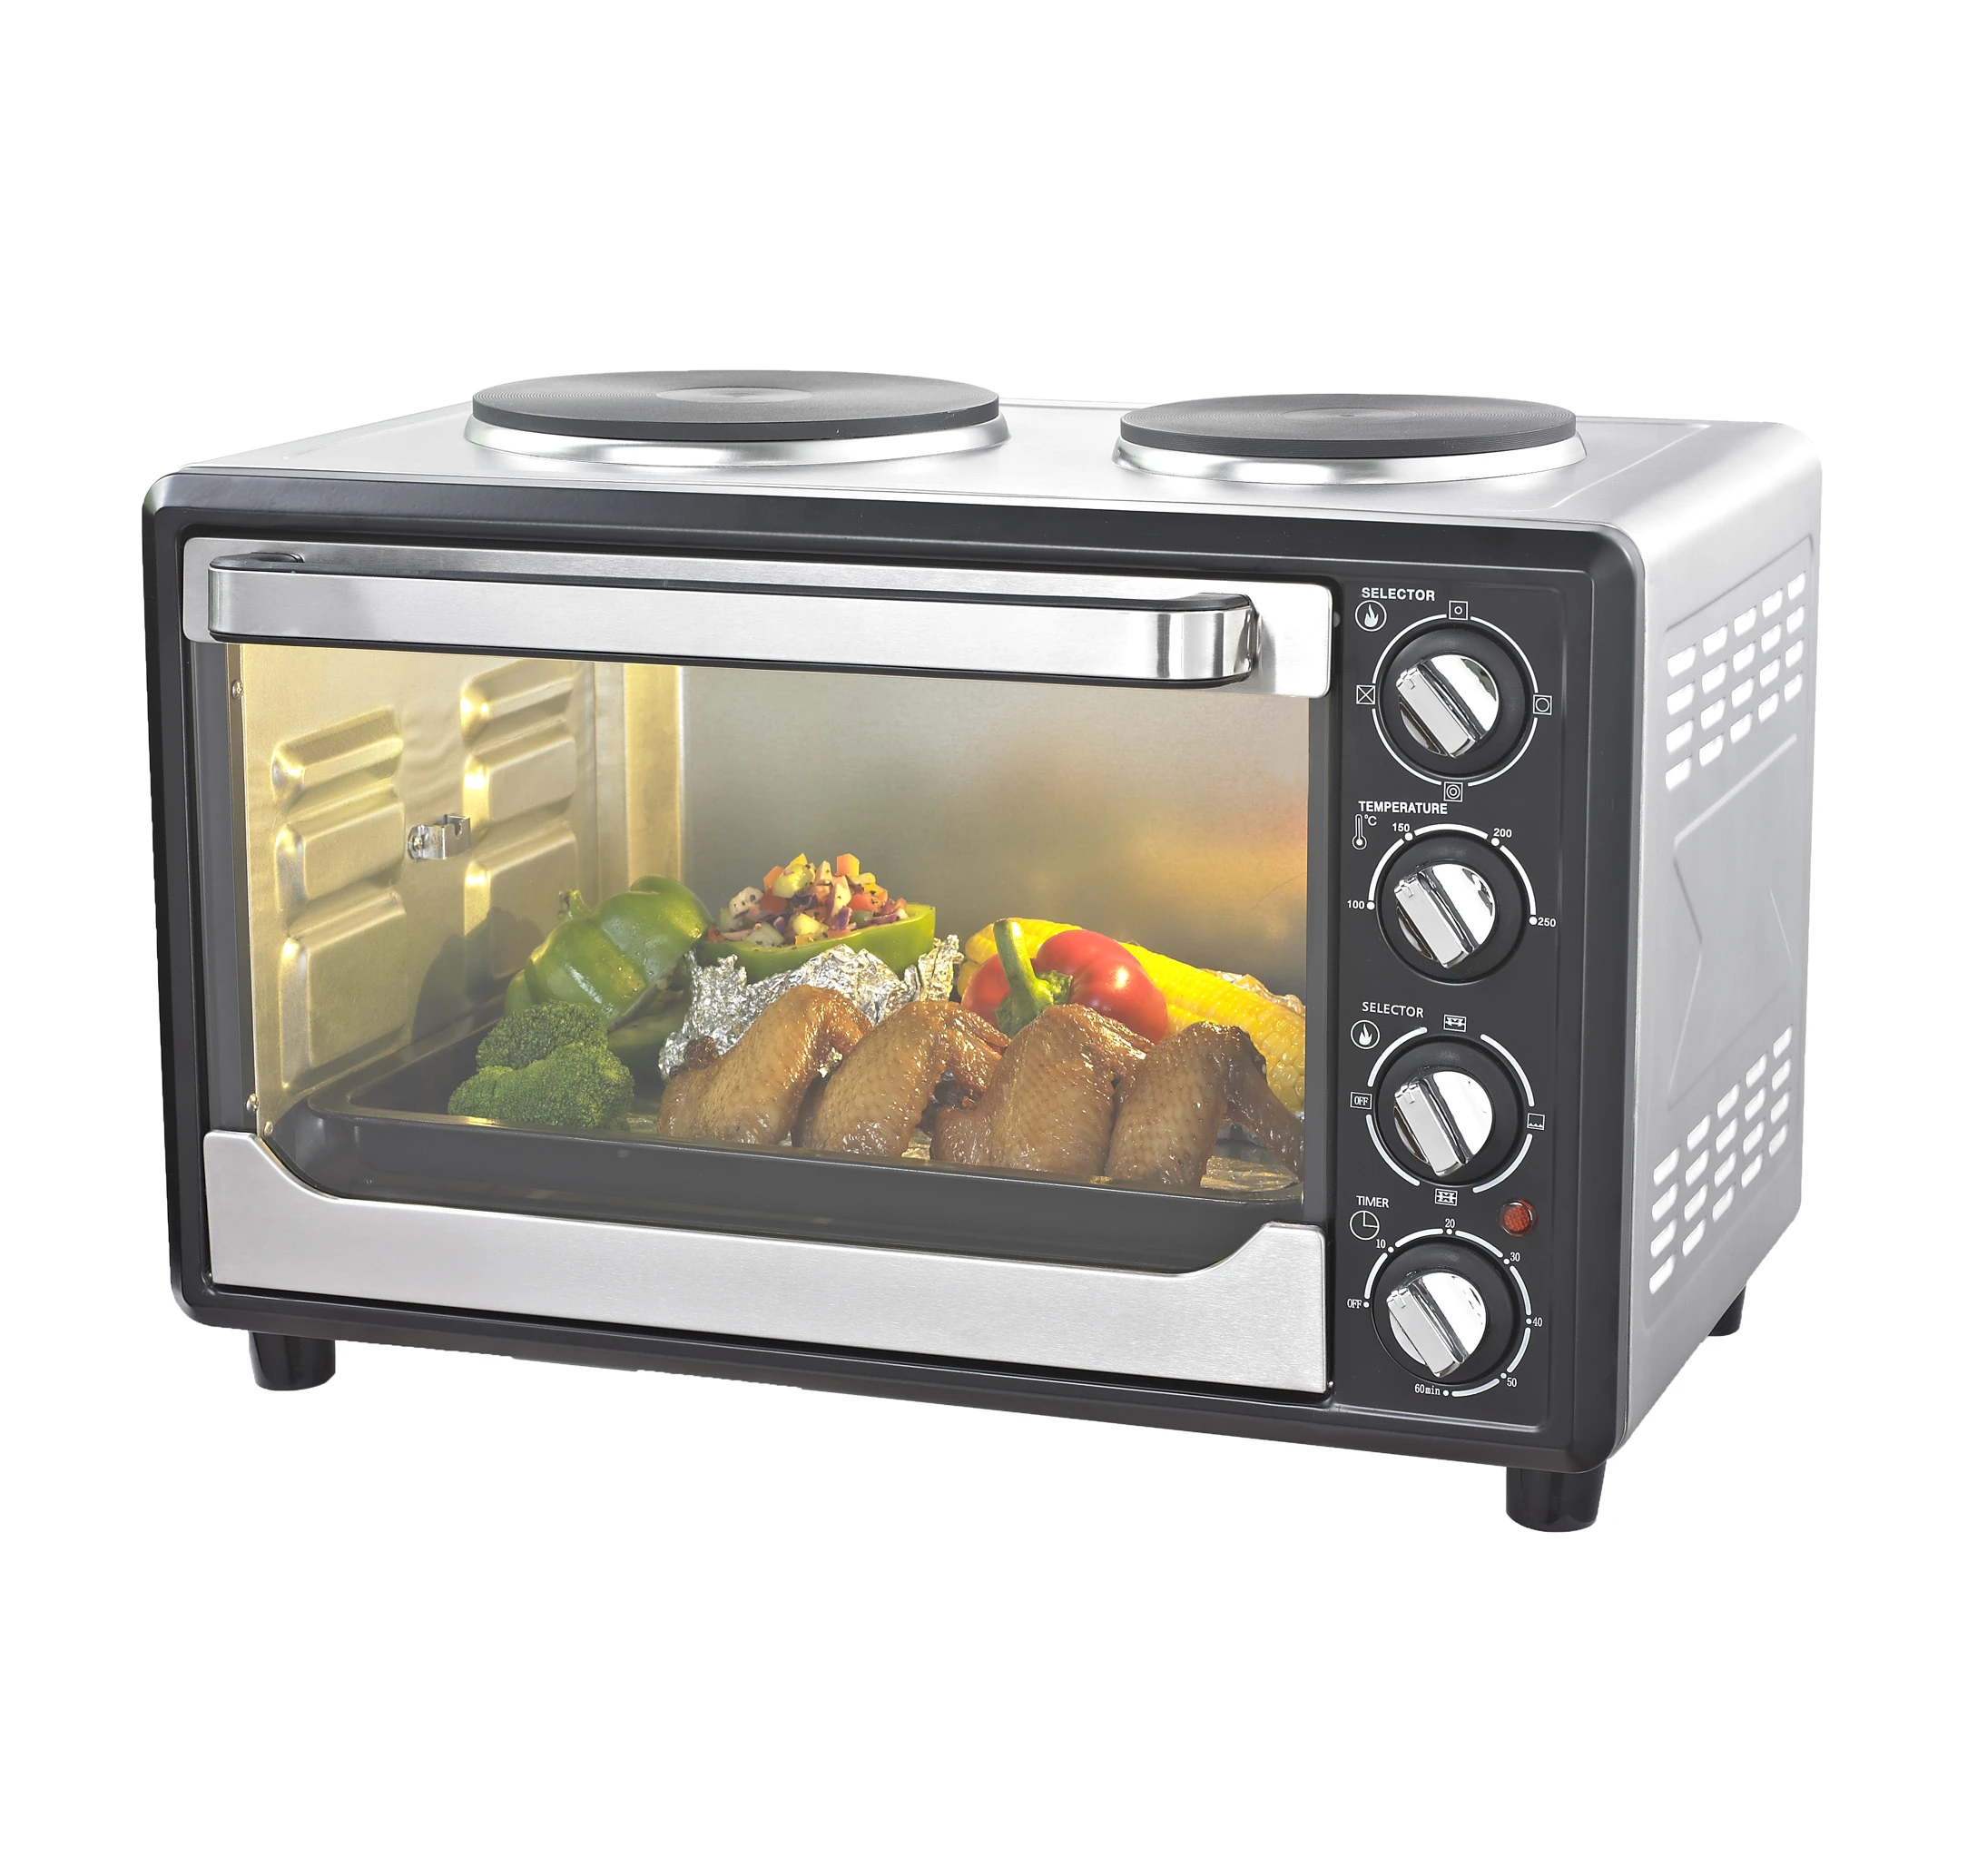 30L toaster oven